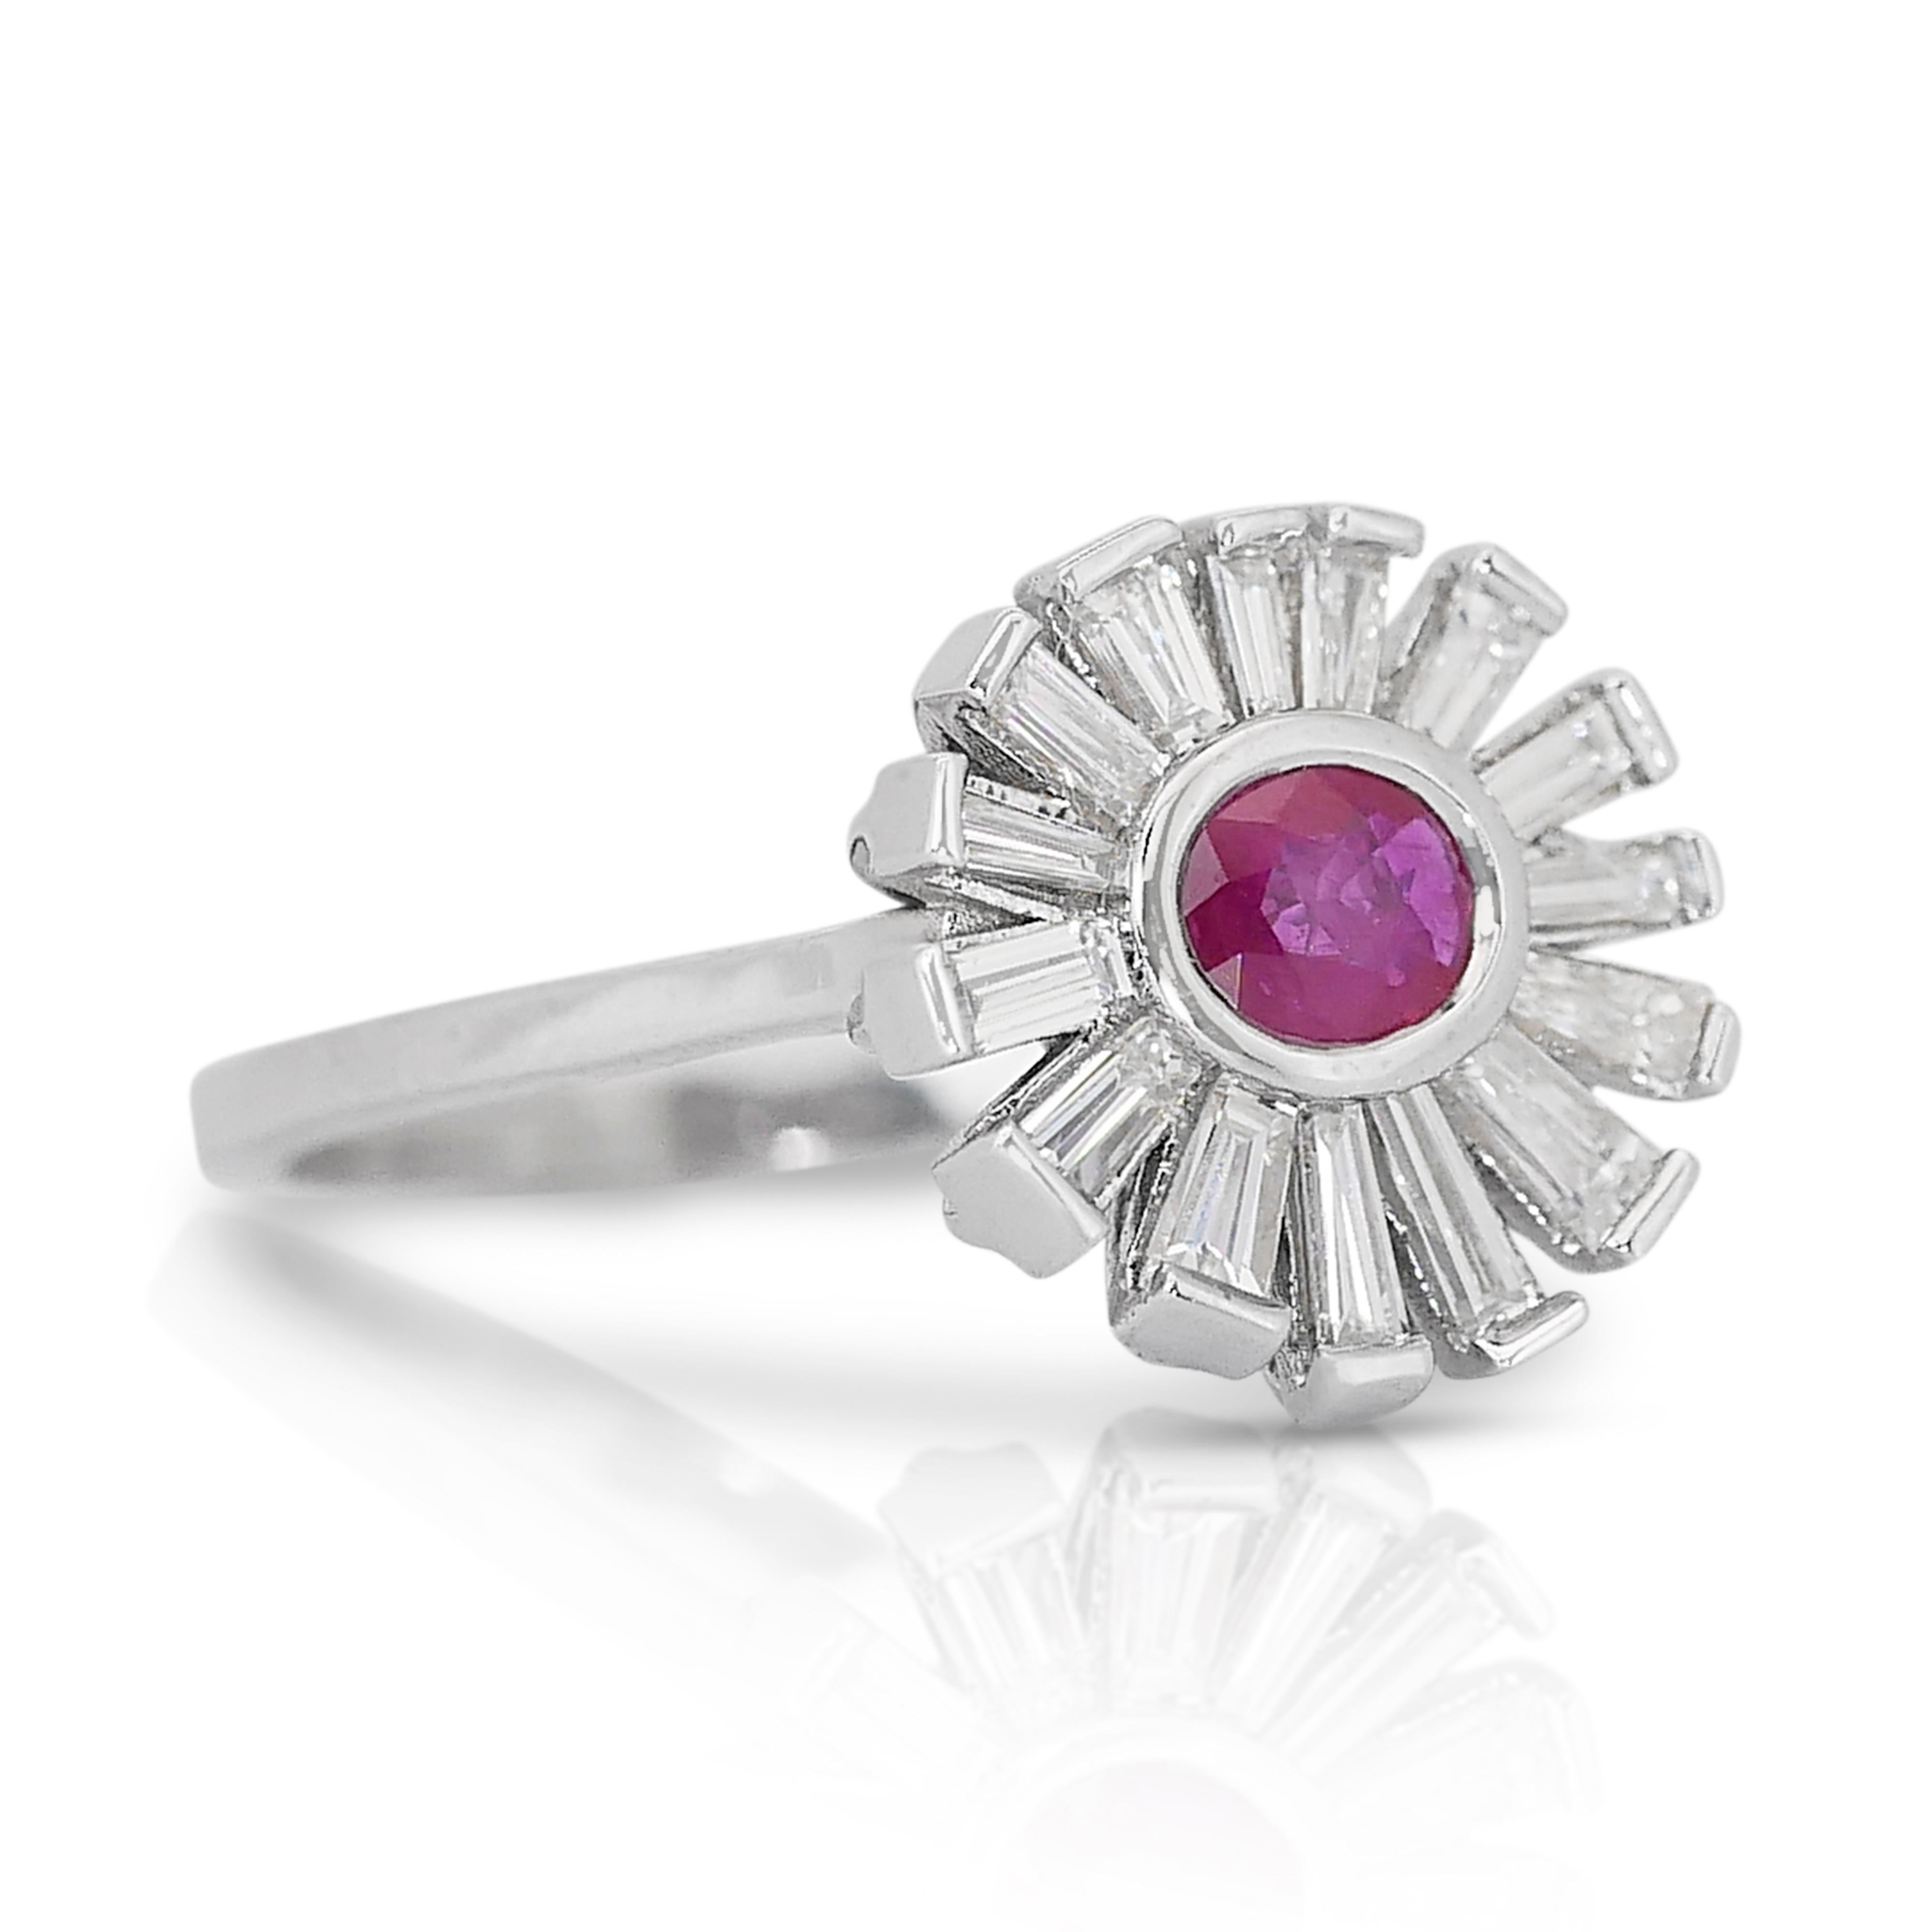 Stunning 1.20ct Ruby and Diamonds Halo Ring in 18k White Gold - IGI Certified

This refined 18k white gold halo ring features a vibrant 0.38-carat oval ruby at its center, radiating a deep purplish-red color that captures the essence of passion and